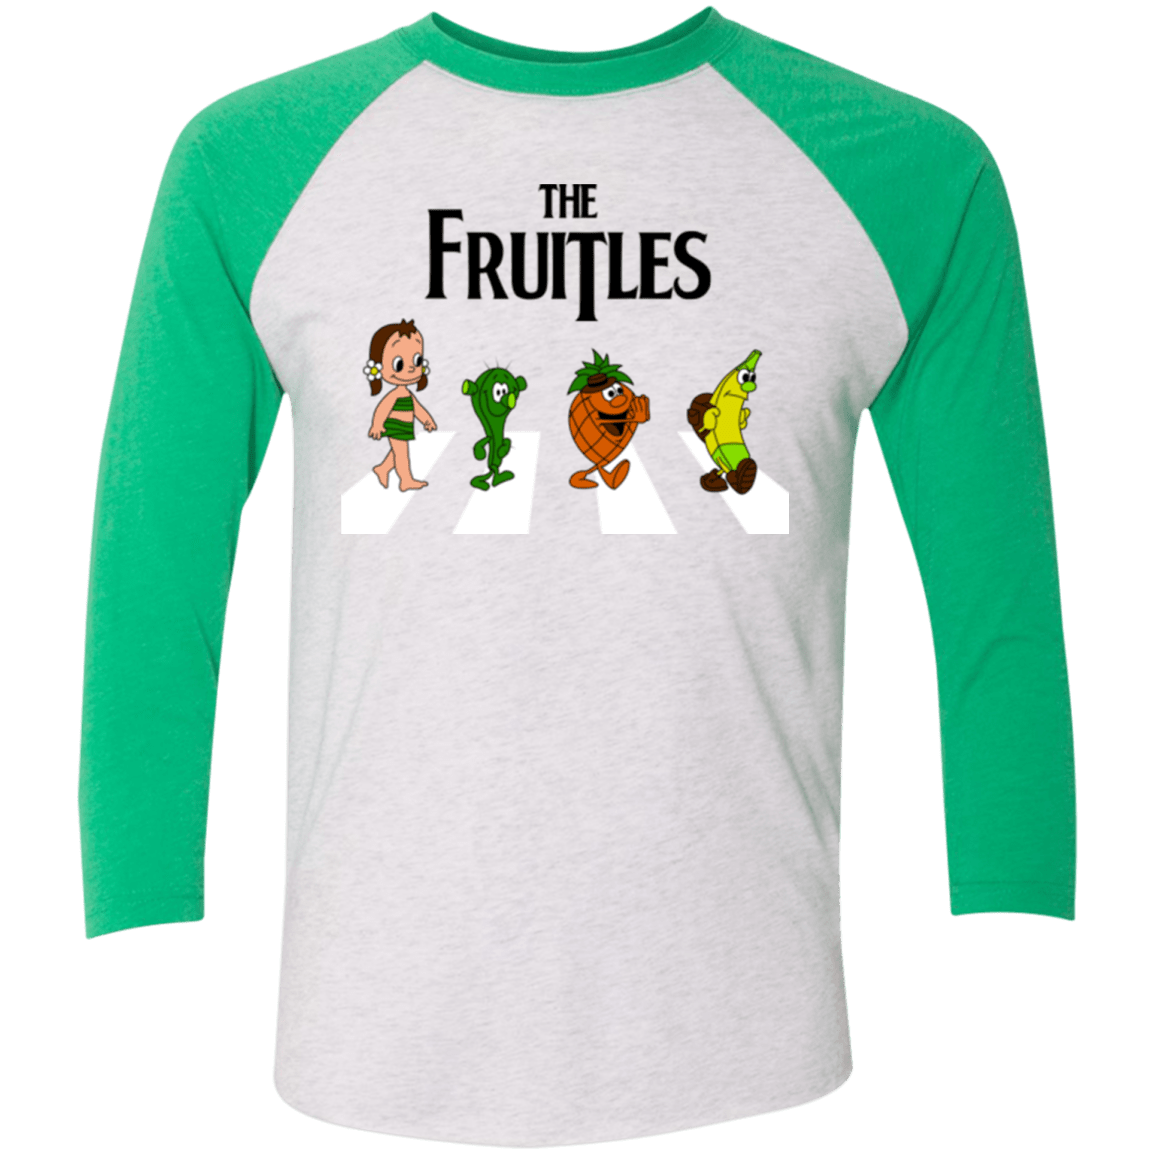 T-Shirts Heather White/Envy / X-Small The Fruitles Men's Triblend 3/4 Sleeve